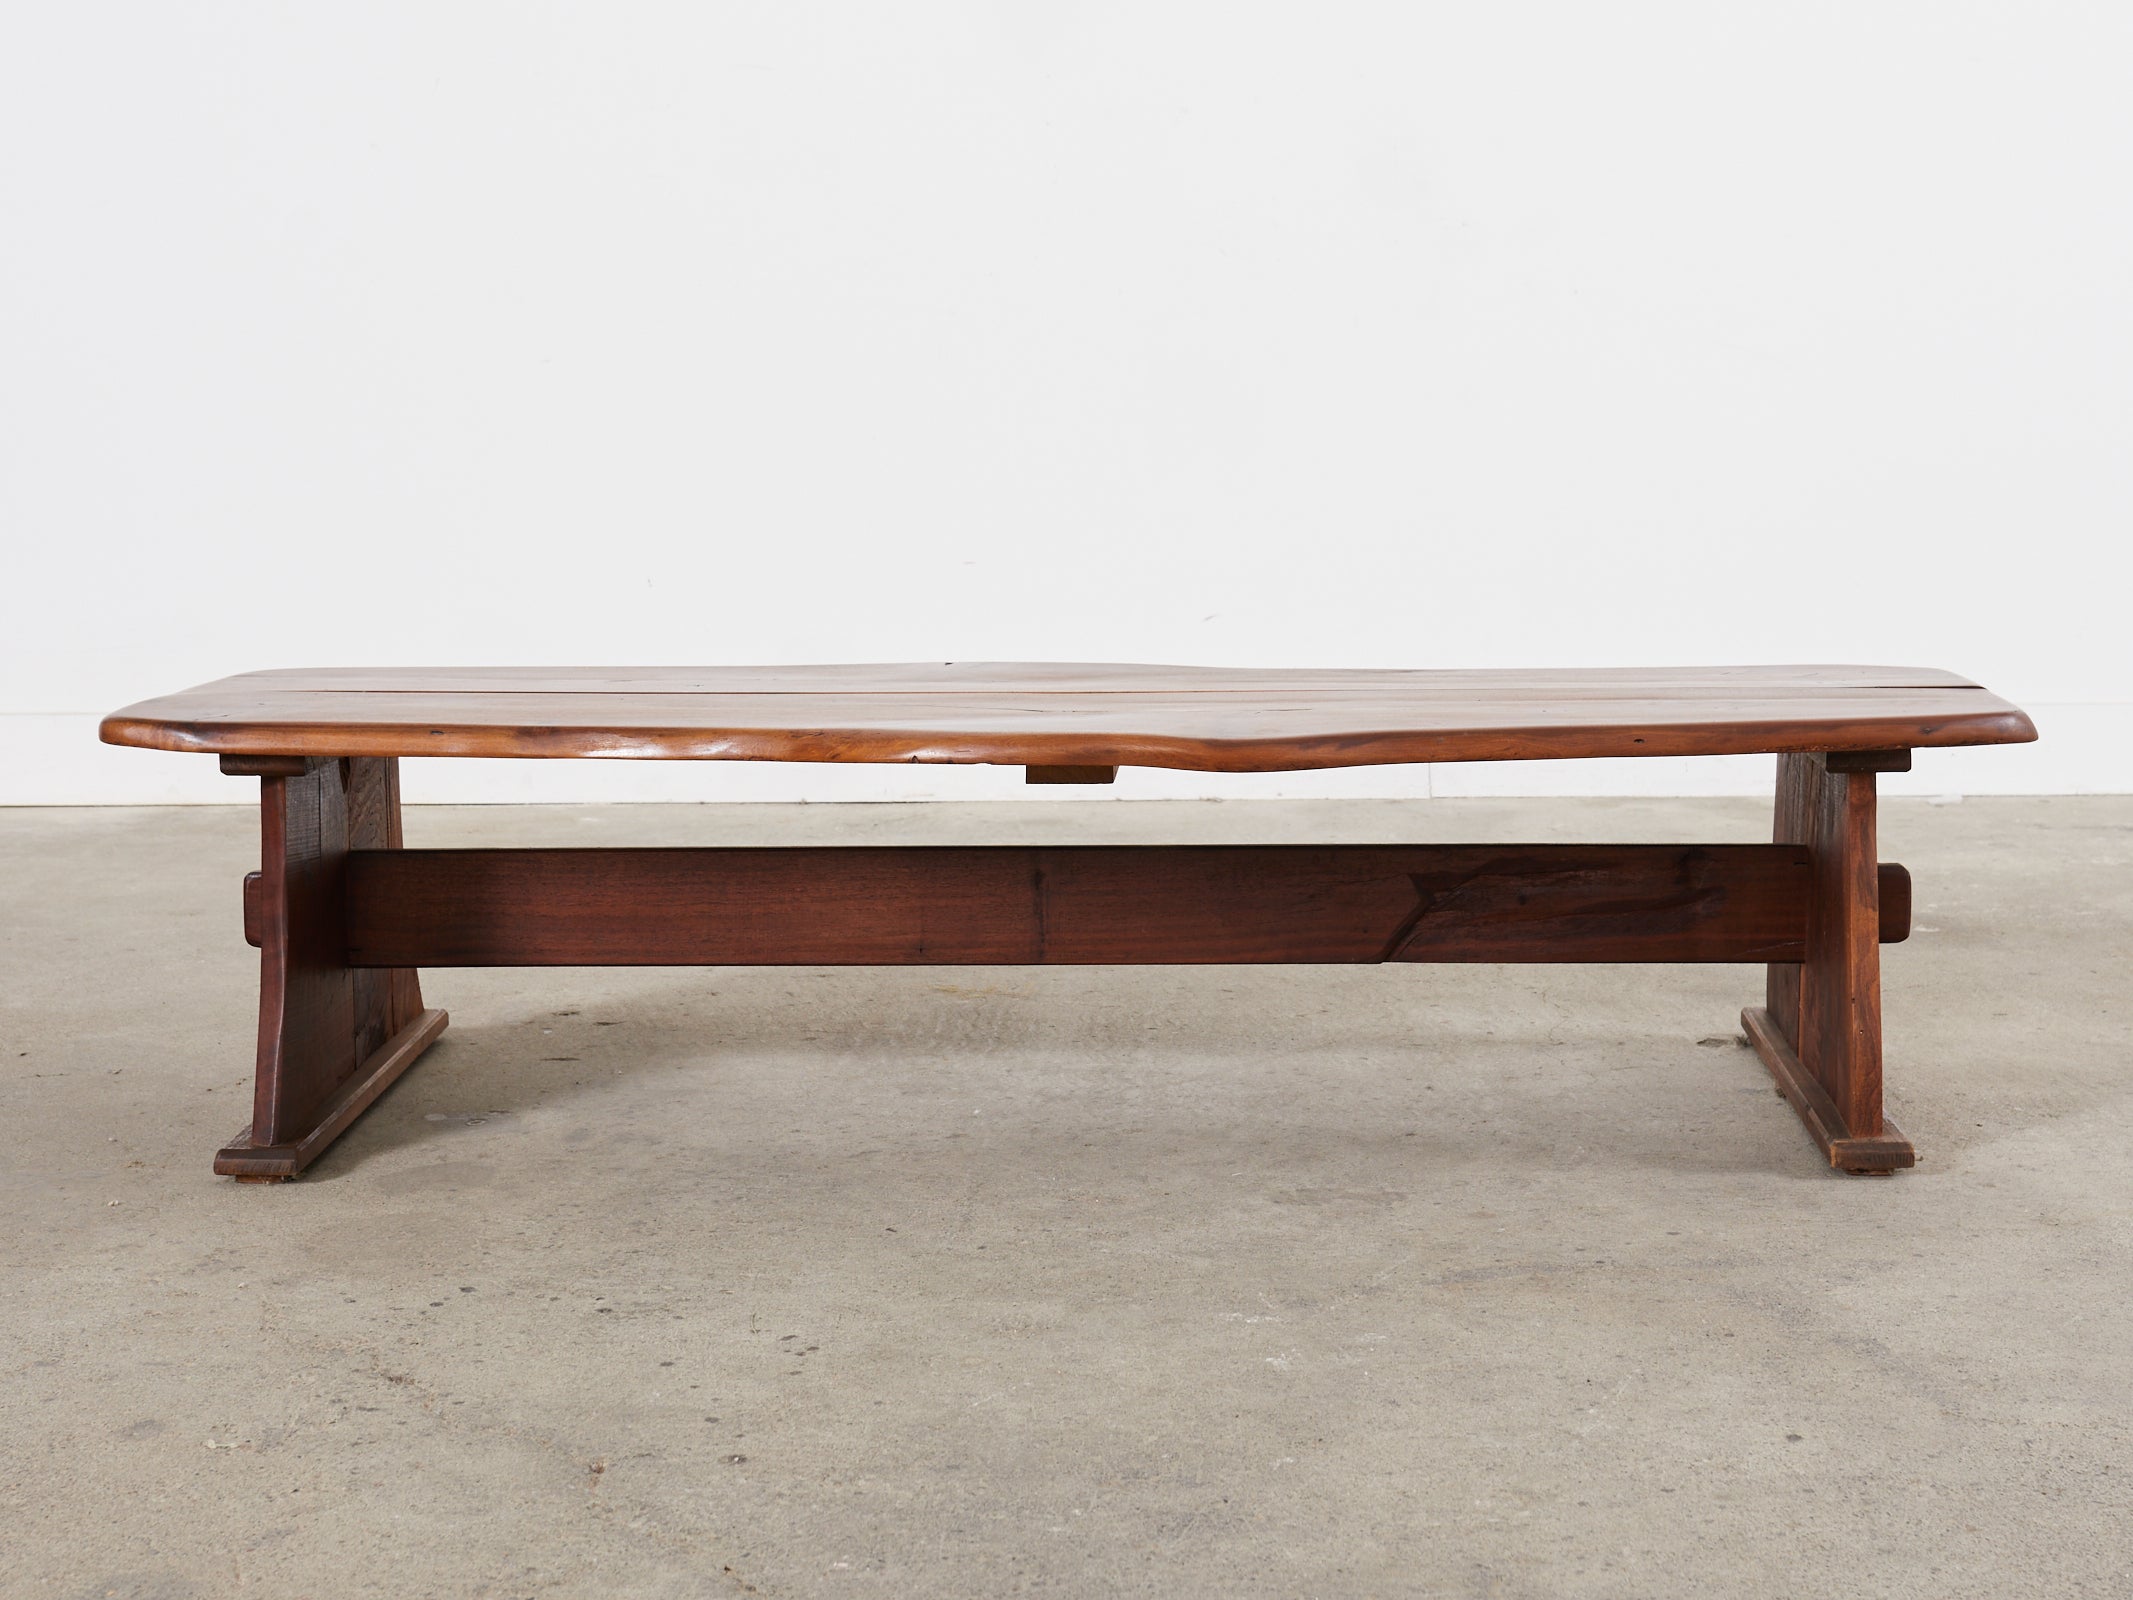 Organic walnut bench coffee table inspired by George Nakashima constructed from two thick slabs of walnut. Featuring a natural edge and supported by a trestle style base with an exposed mortise and tenon joinery. This bench could also serve as a